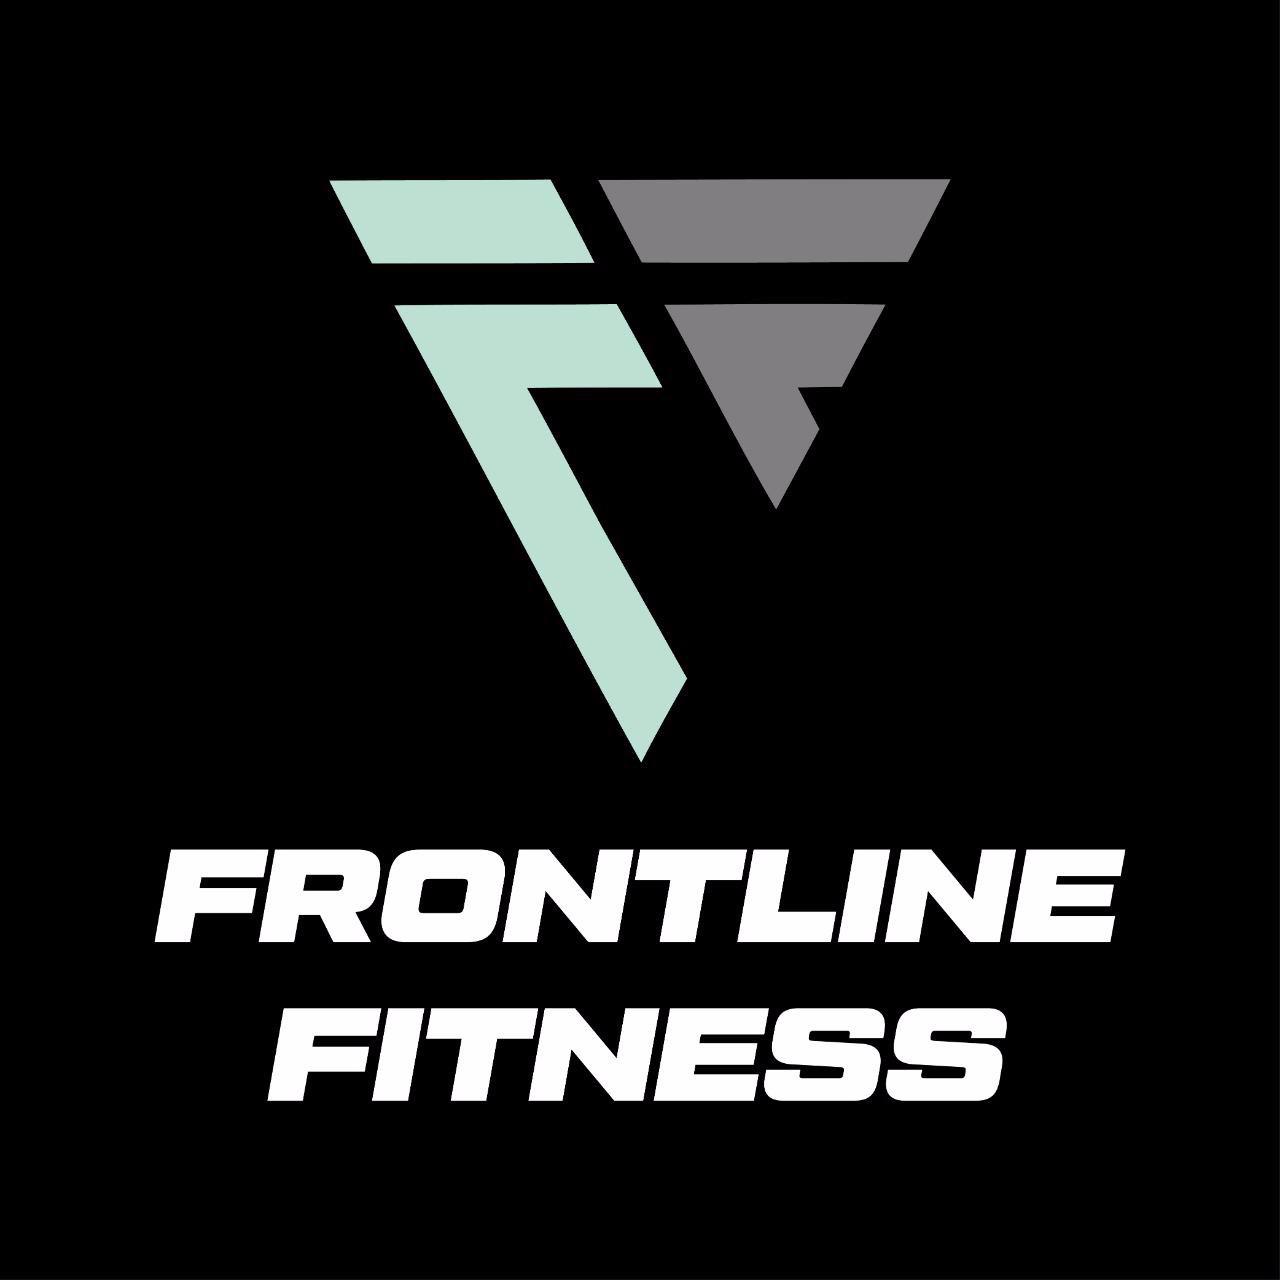 Frontline Fitness - Sydney, NSW 2192 - 0458 000 801 | ShowMeLocal.com